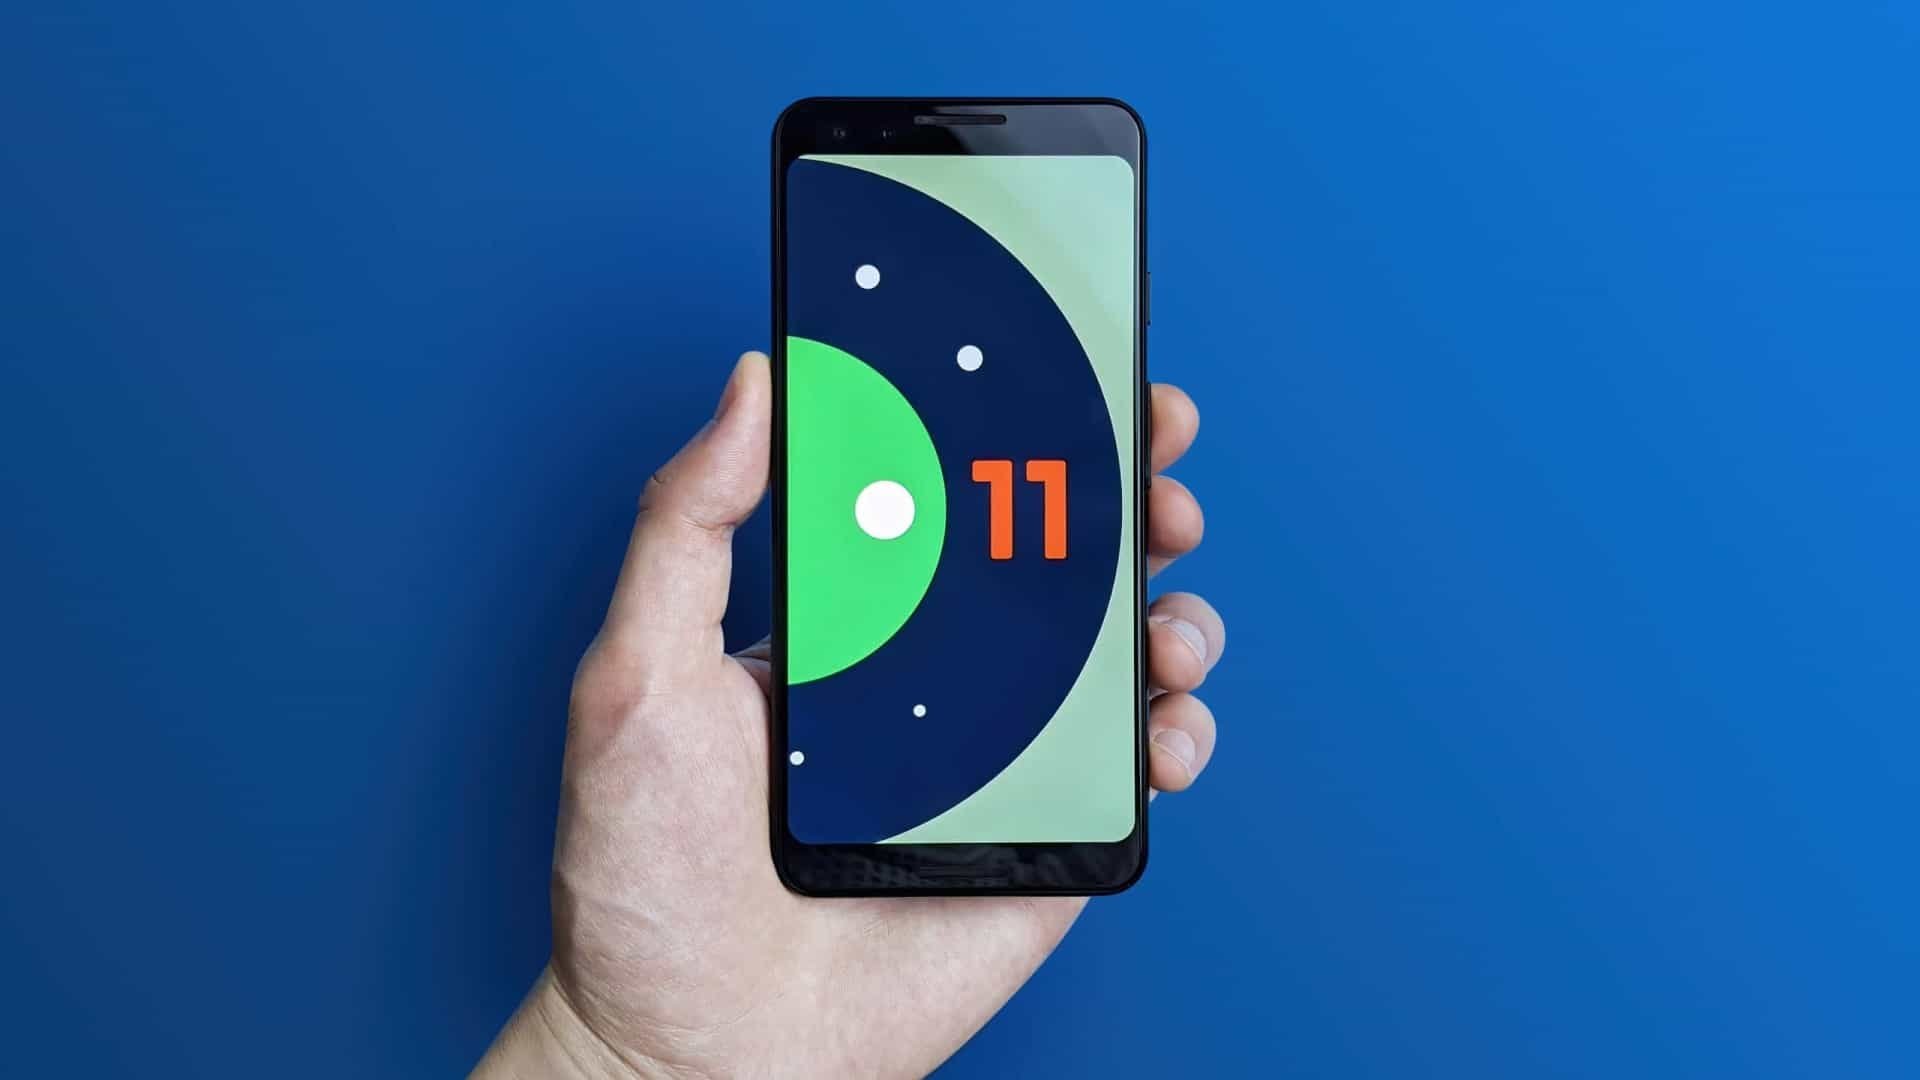 Android 11 smartphone